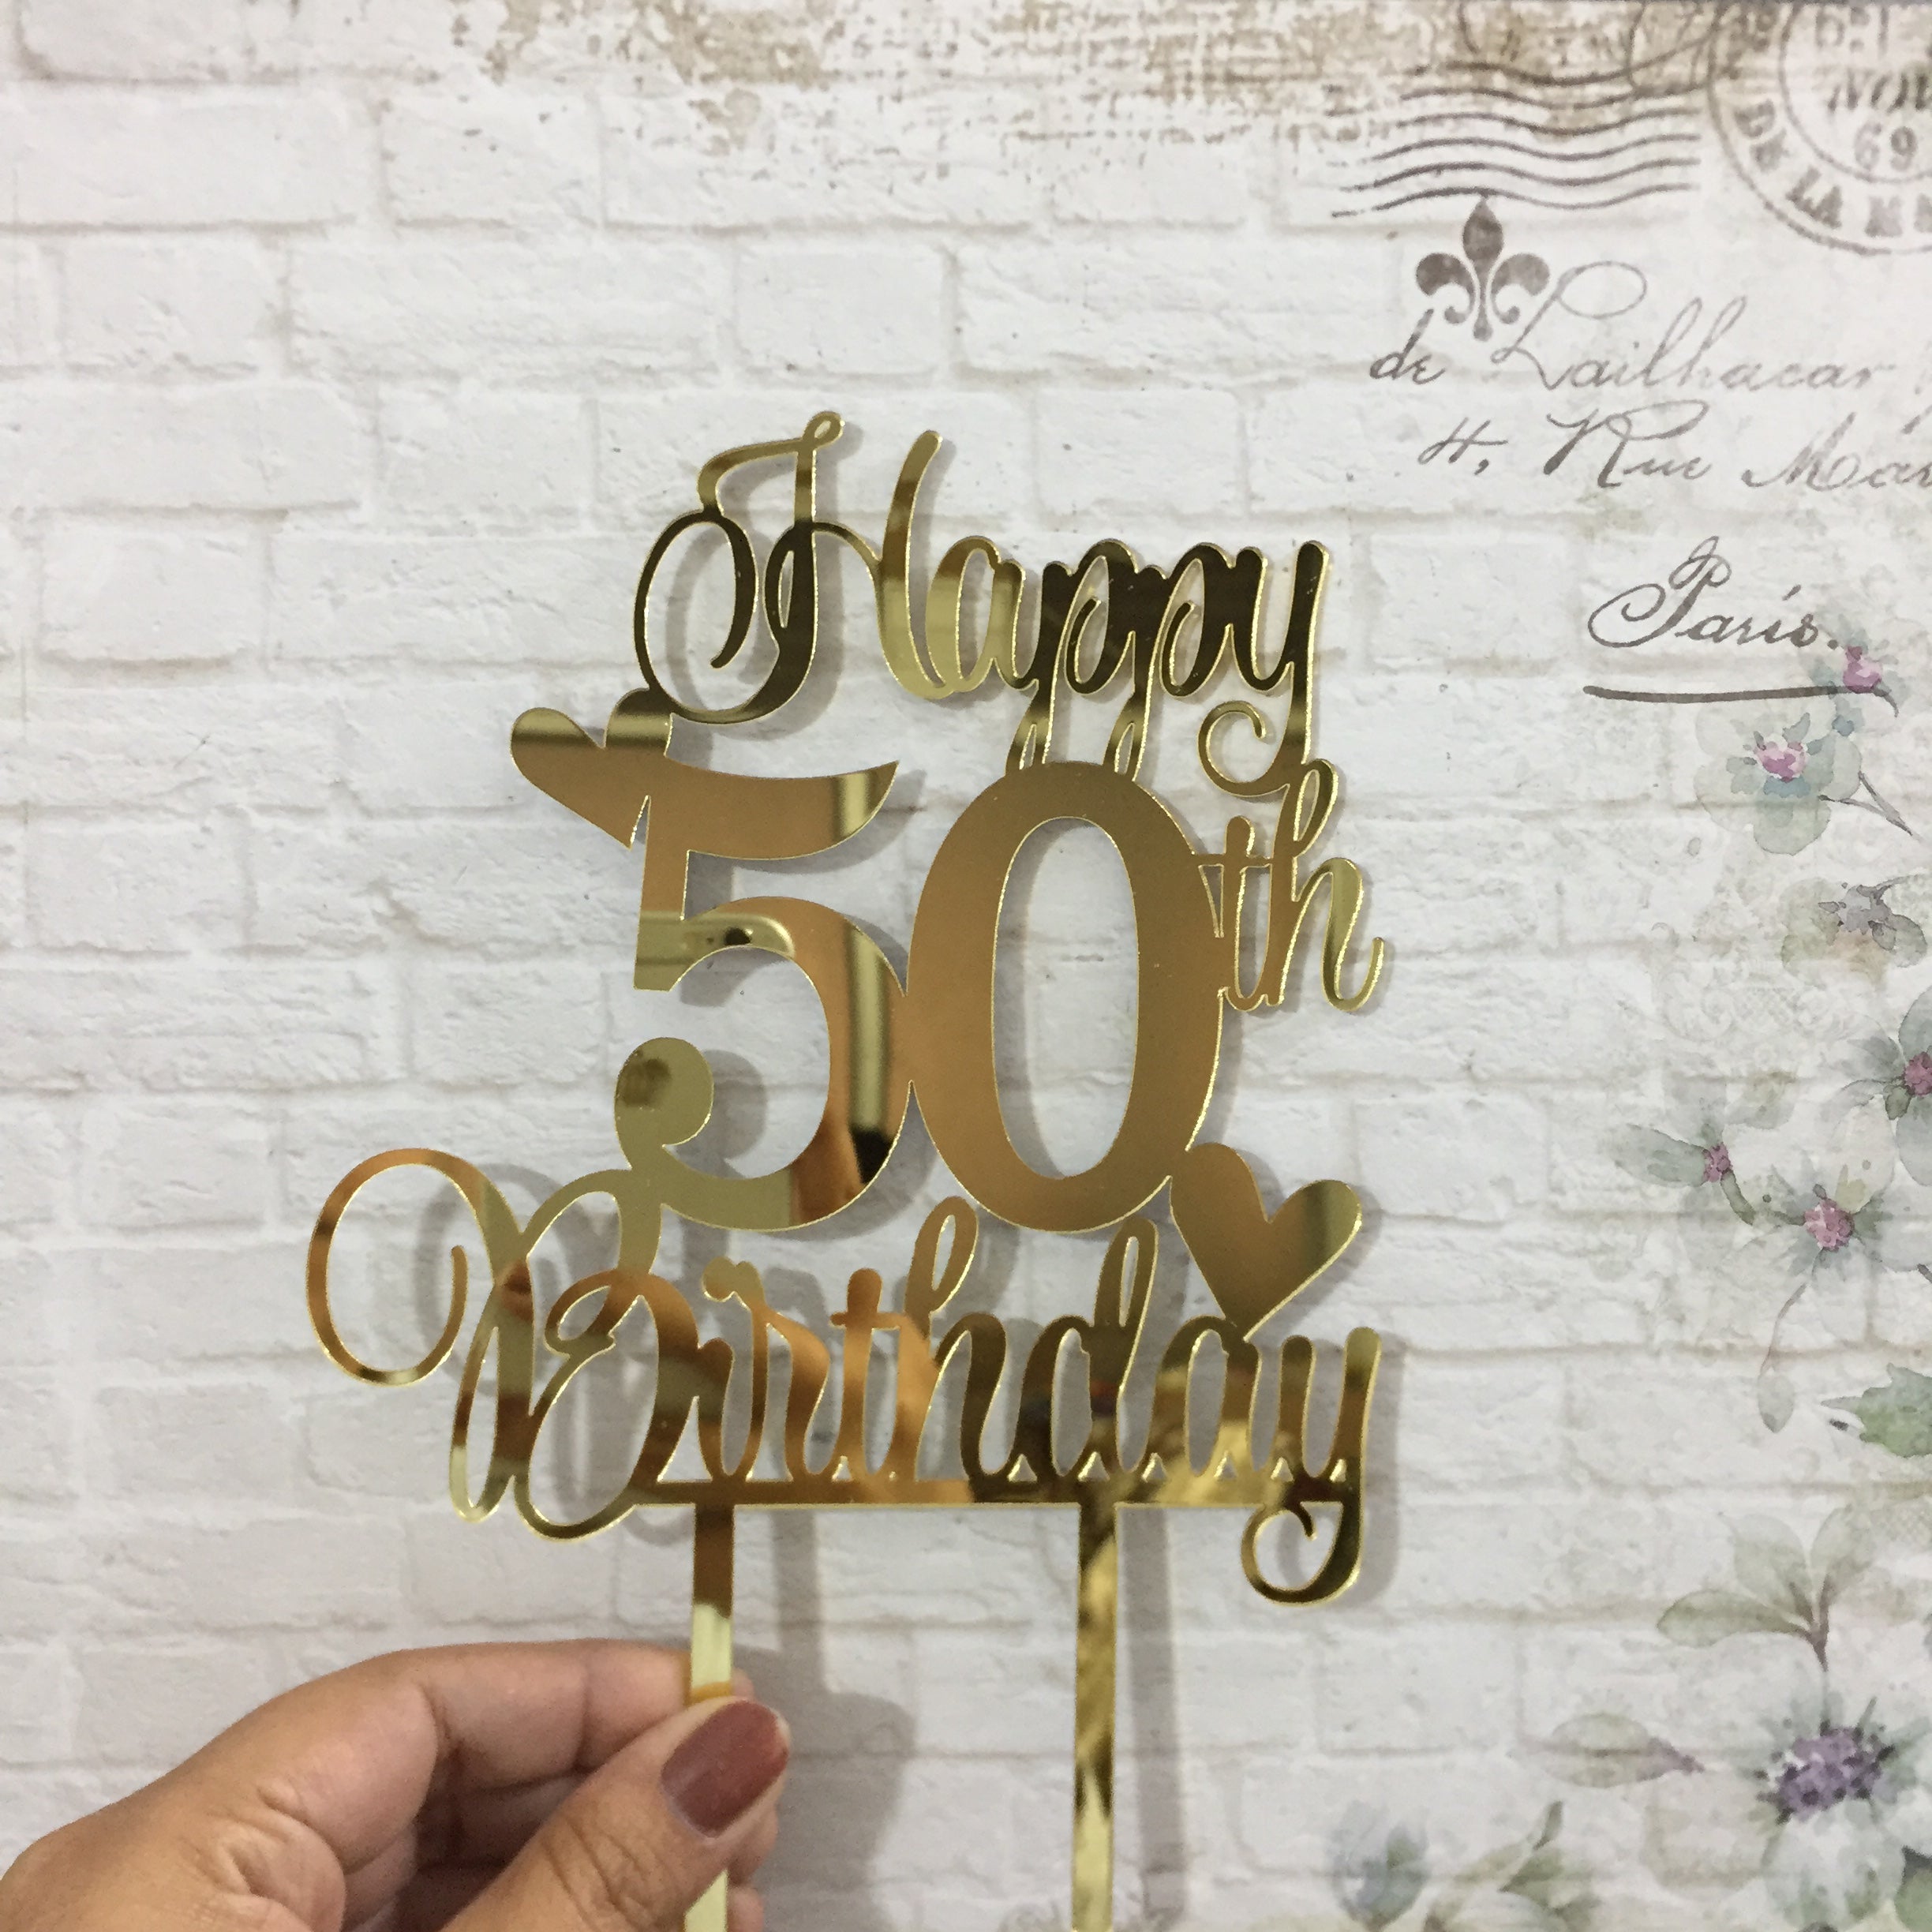 Fabulous 50 Cake Topper -50CT0011 – Cake Toppers India